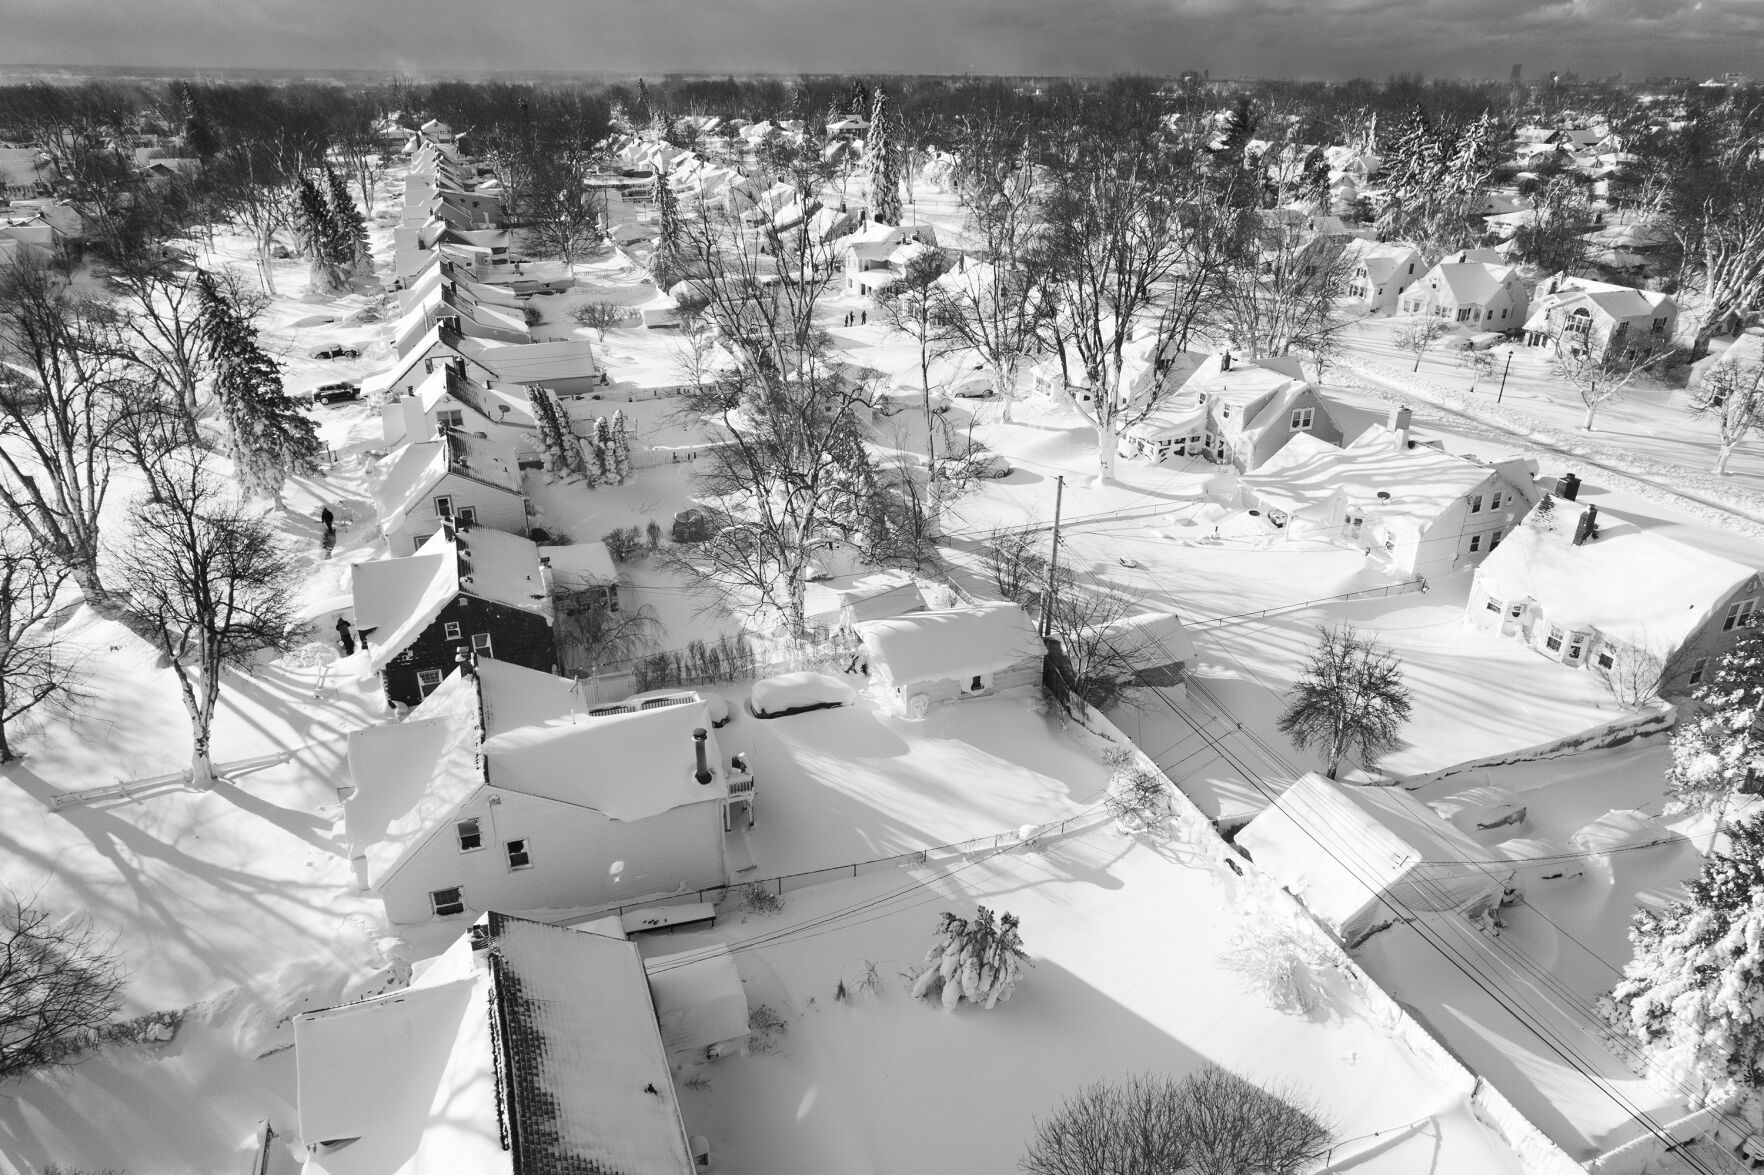 <p>In this drone image, snow blankets a neighborhood, Sunday, Dec. 25, 2022, in Cheektowaga, N.Y. Millions of people hunkered down against a deep freeze Sunday morning to ride out the frigid storm that has killed at least 24 people across the United States and is expected to claim more lives after trapping some residents inside houses with heaping snow drifts and knocking out power to several hundred thousand homes and businesses.(John Waller via AP)</p>   PHOTO CREDIT: John Waller - handout one time use, John Waller